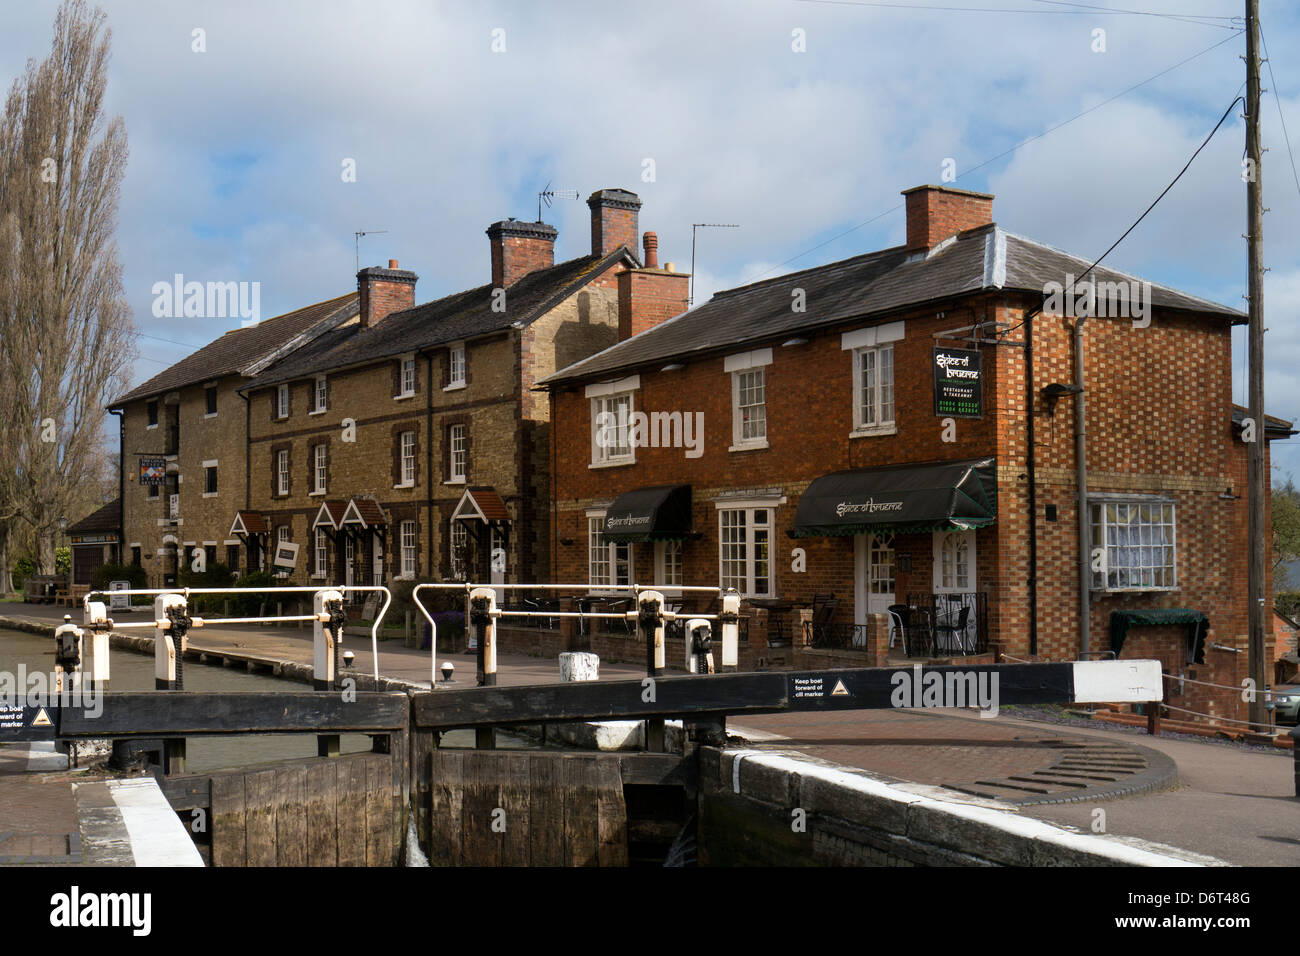 STOKE BRUERNE, NORTHAMPTONSHIRE, UK - APRIL 18, 2013:   The Lock aon the Grand Union Canal with canalside houses Stock Photo